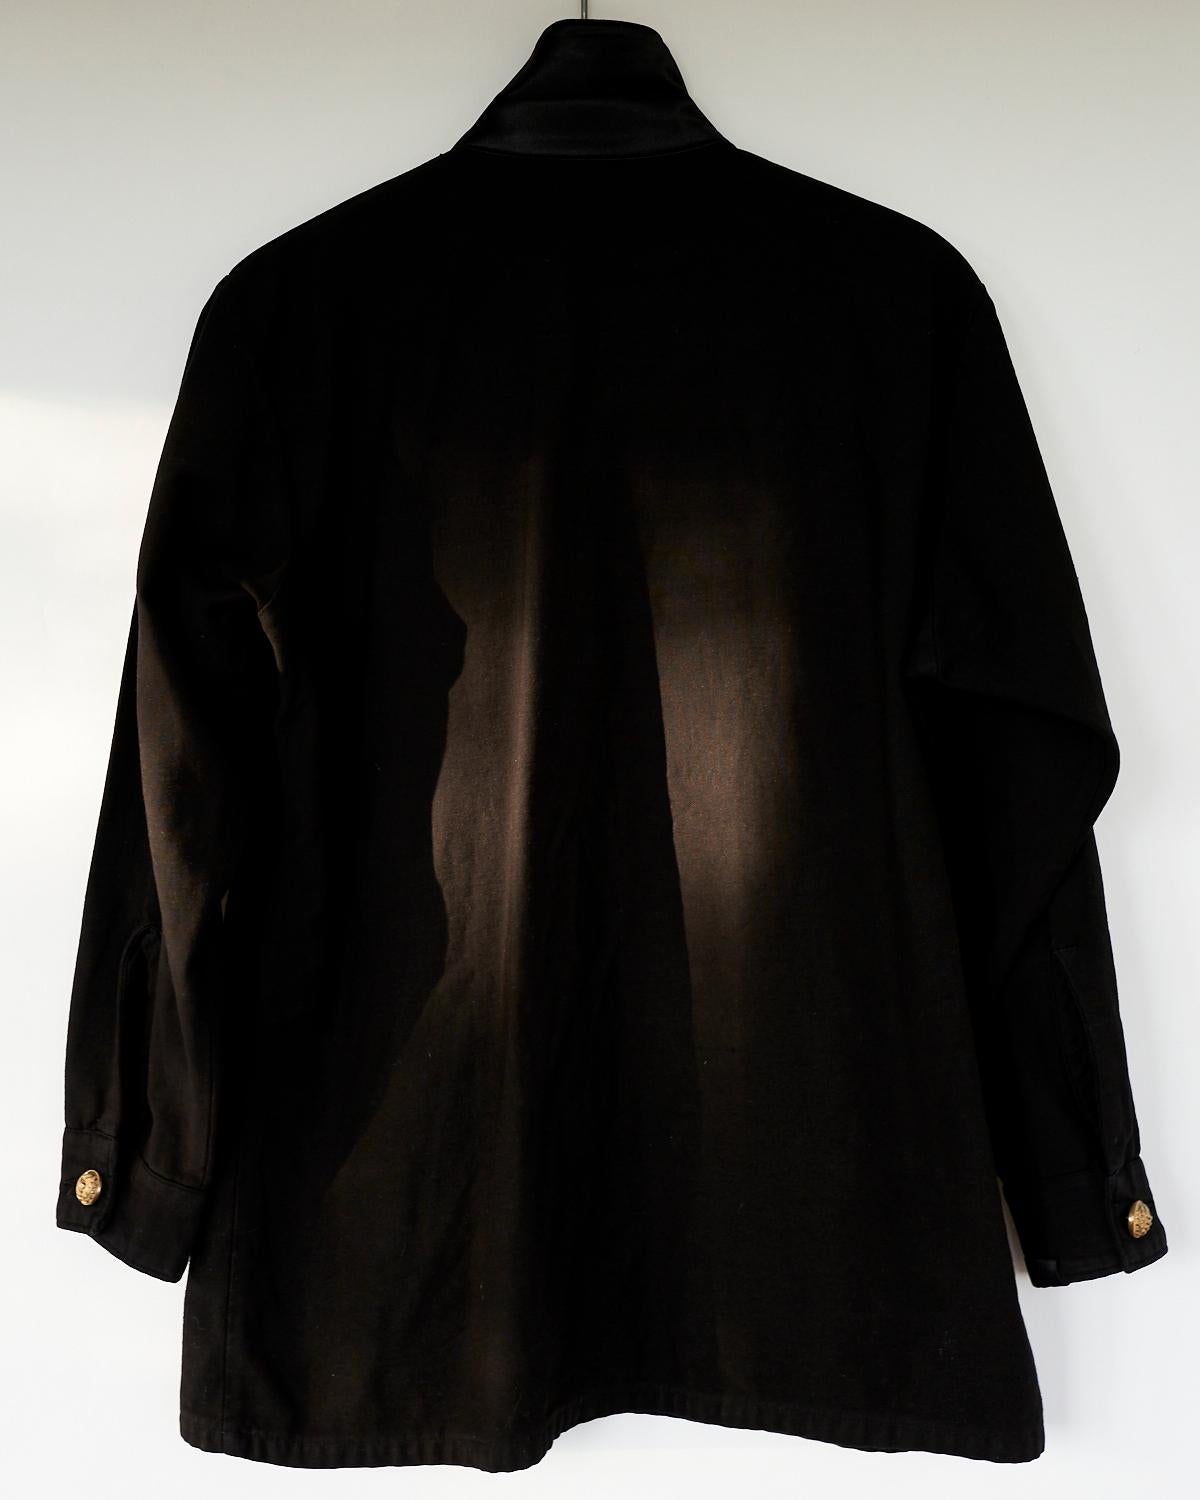 Embellished Evening Blazer Jacket Military Gold Button Black Tweed J Dauphin In New Condition In Los Angeles, CA